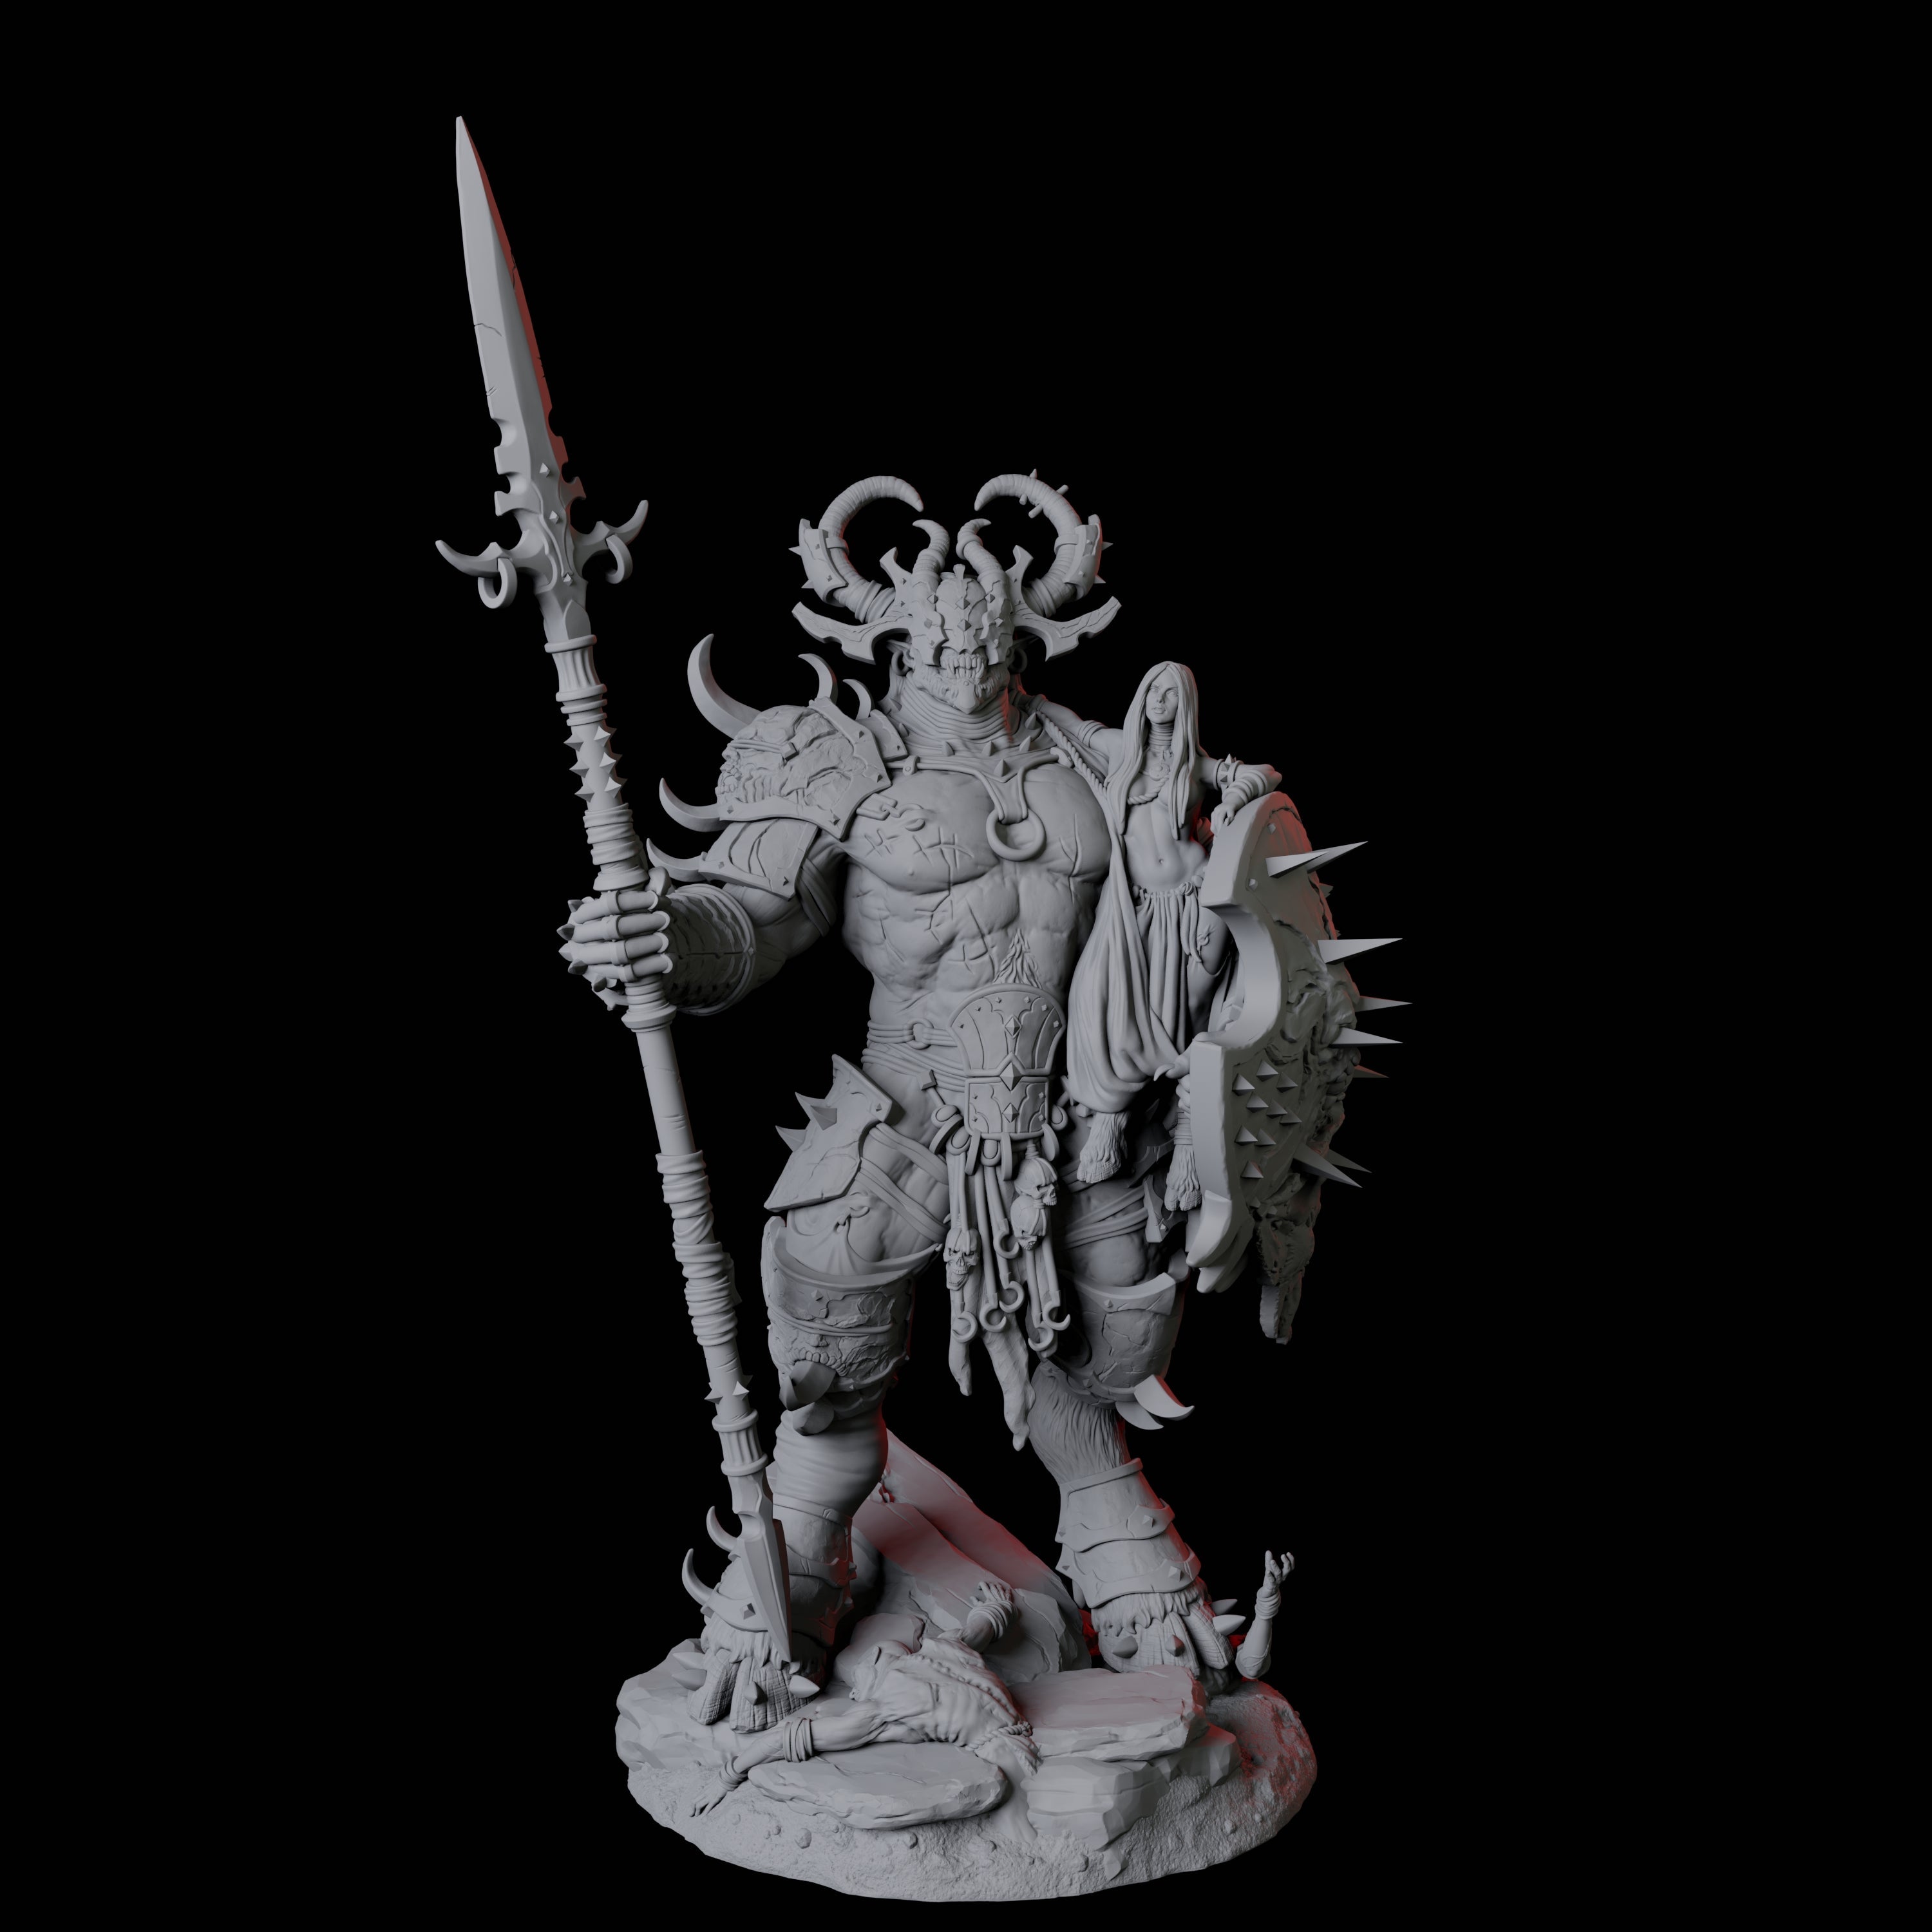 Four Seduced Bearded Devil Champions Miniature for Dungeons and Dragons, Pathfinder or other TTRPGs